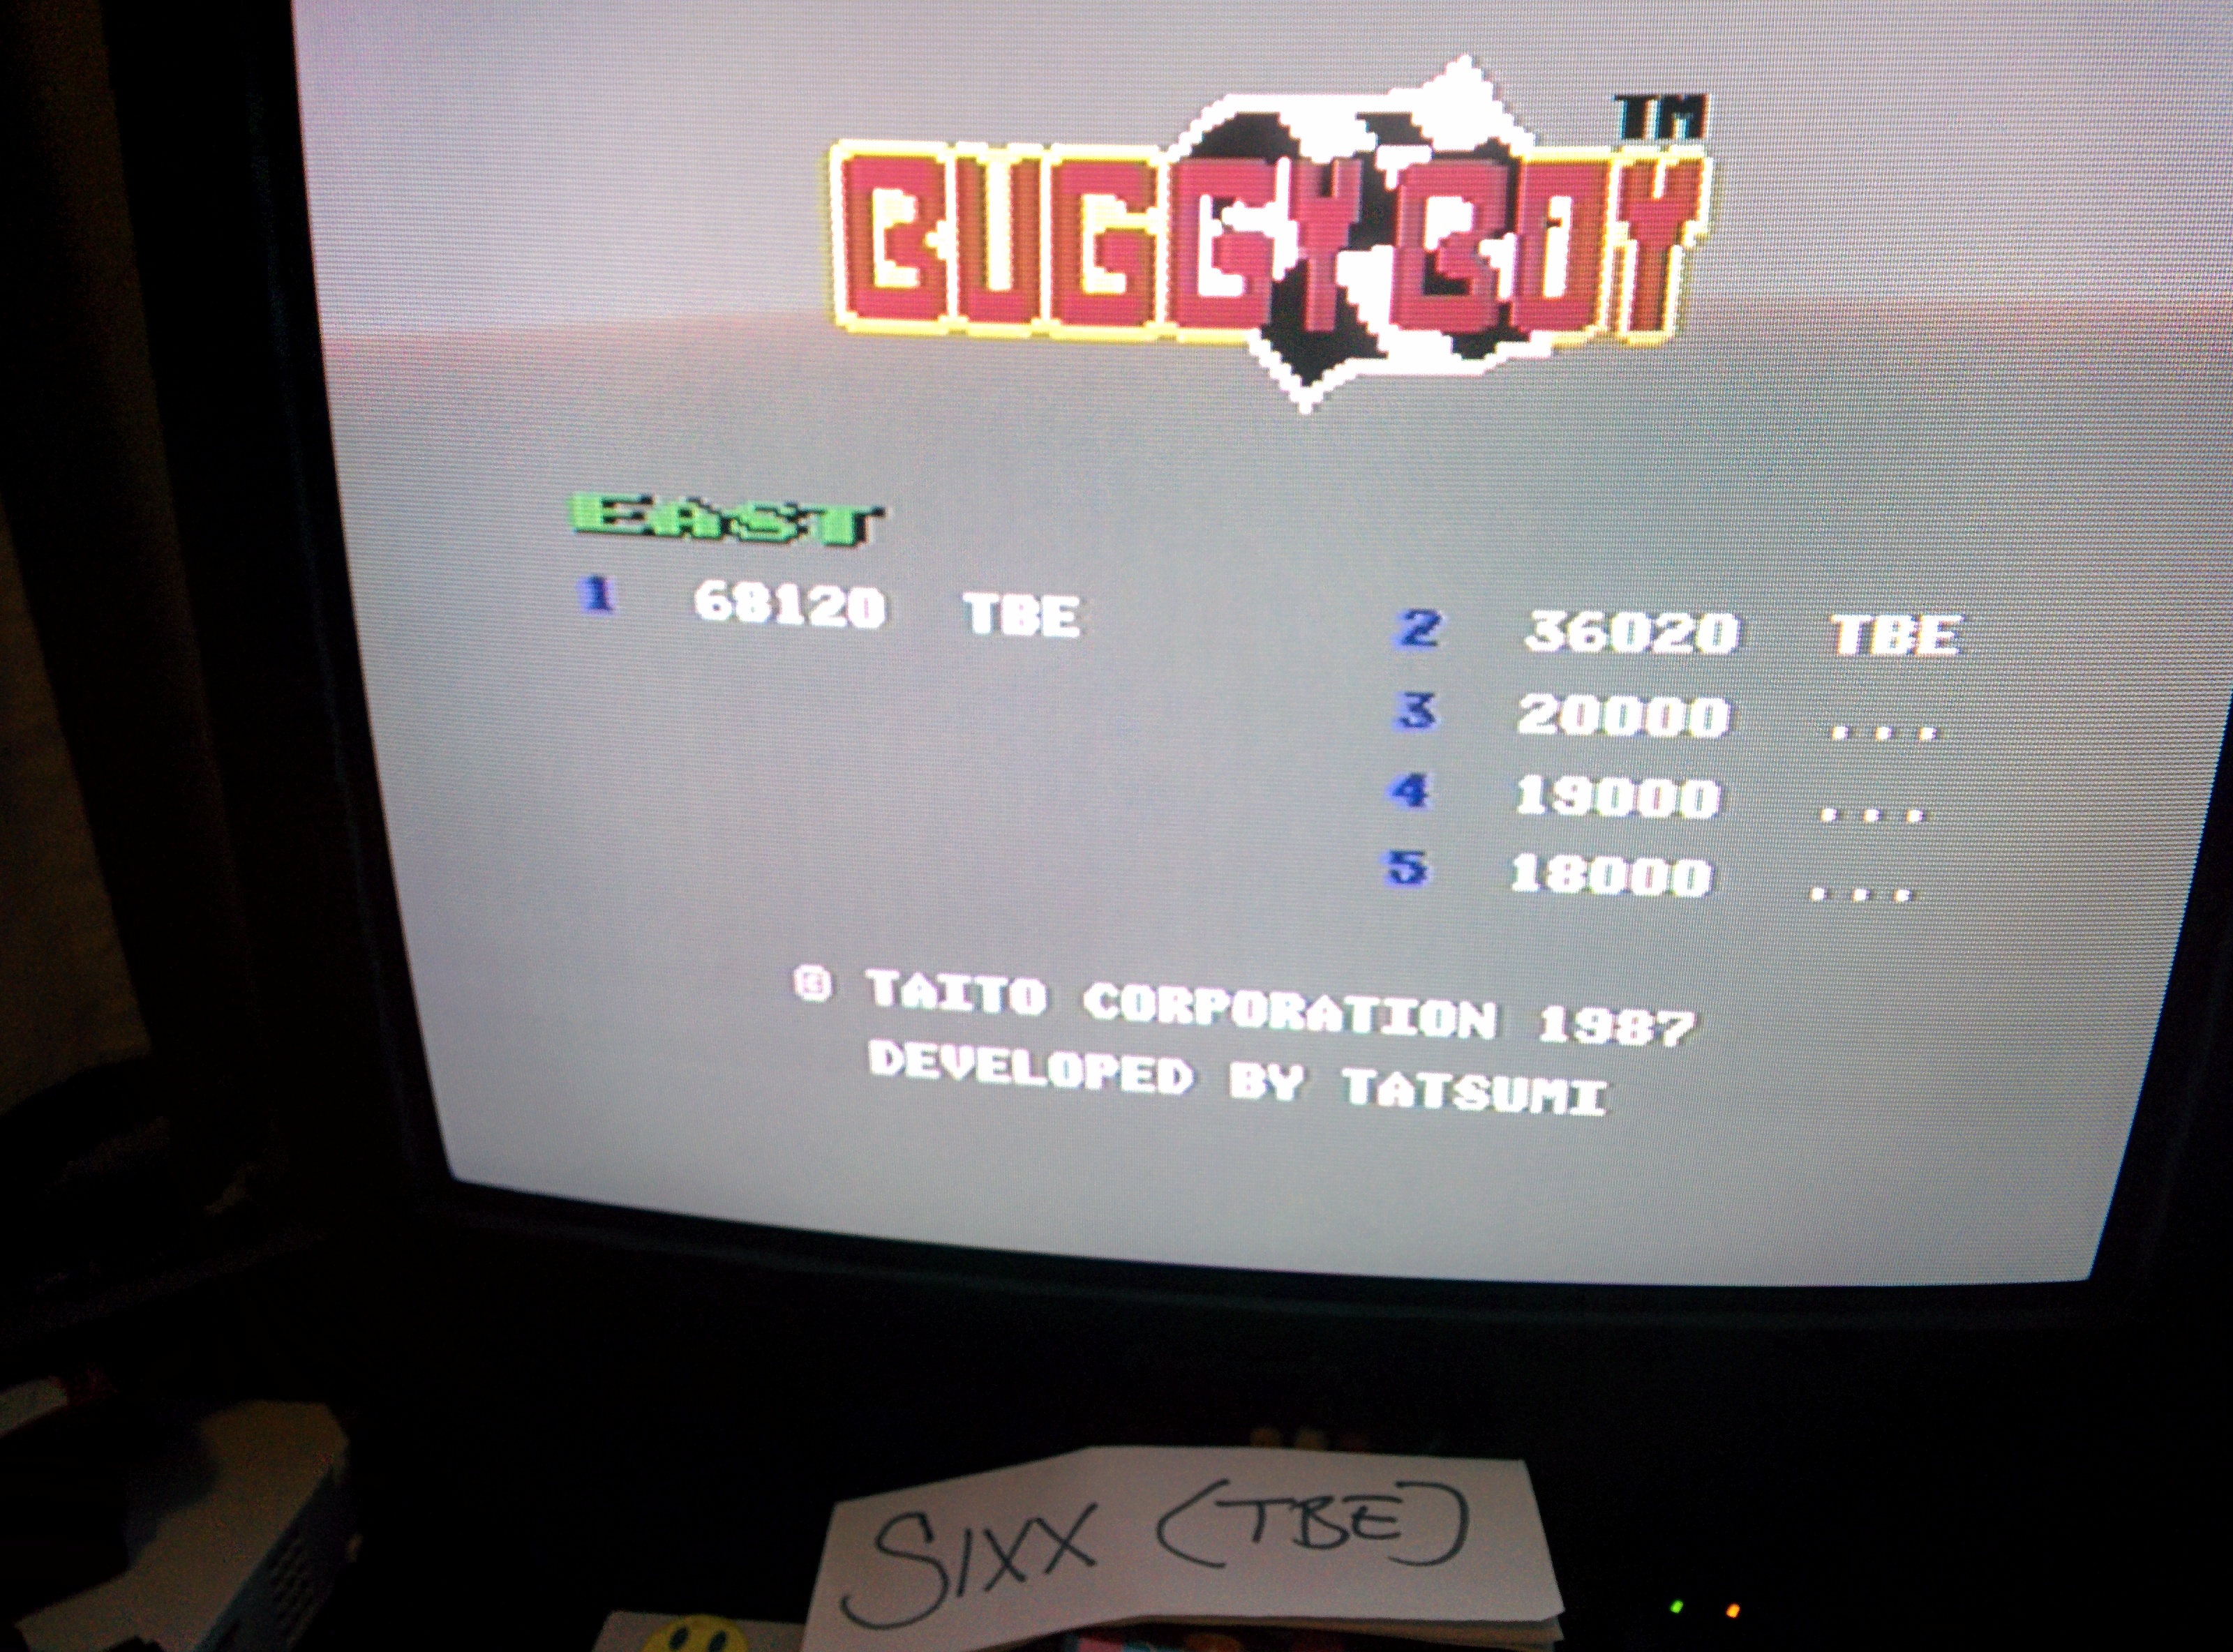 Sixx: Buggy Boy: East (Commodore 64) 68,120 points on 2014-07-16 16:07:56